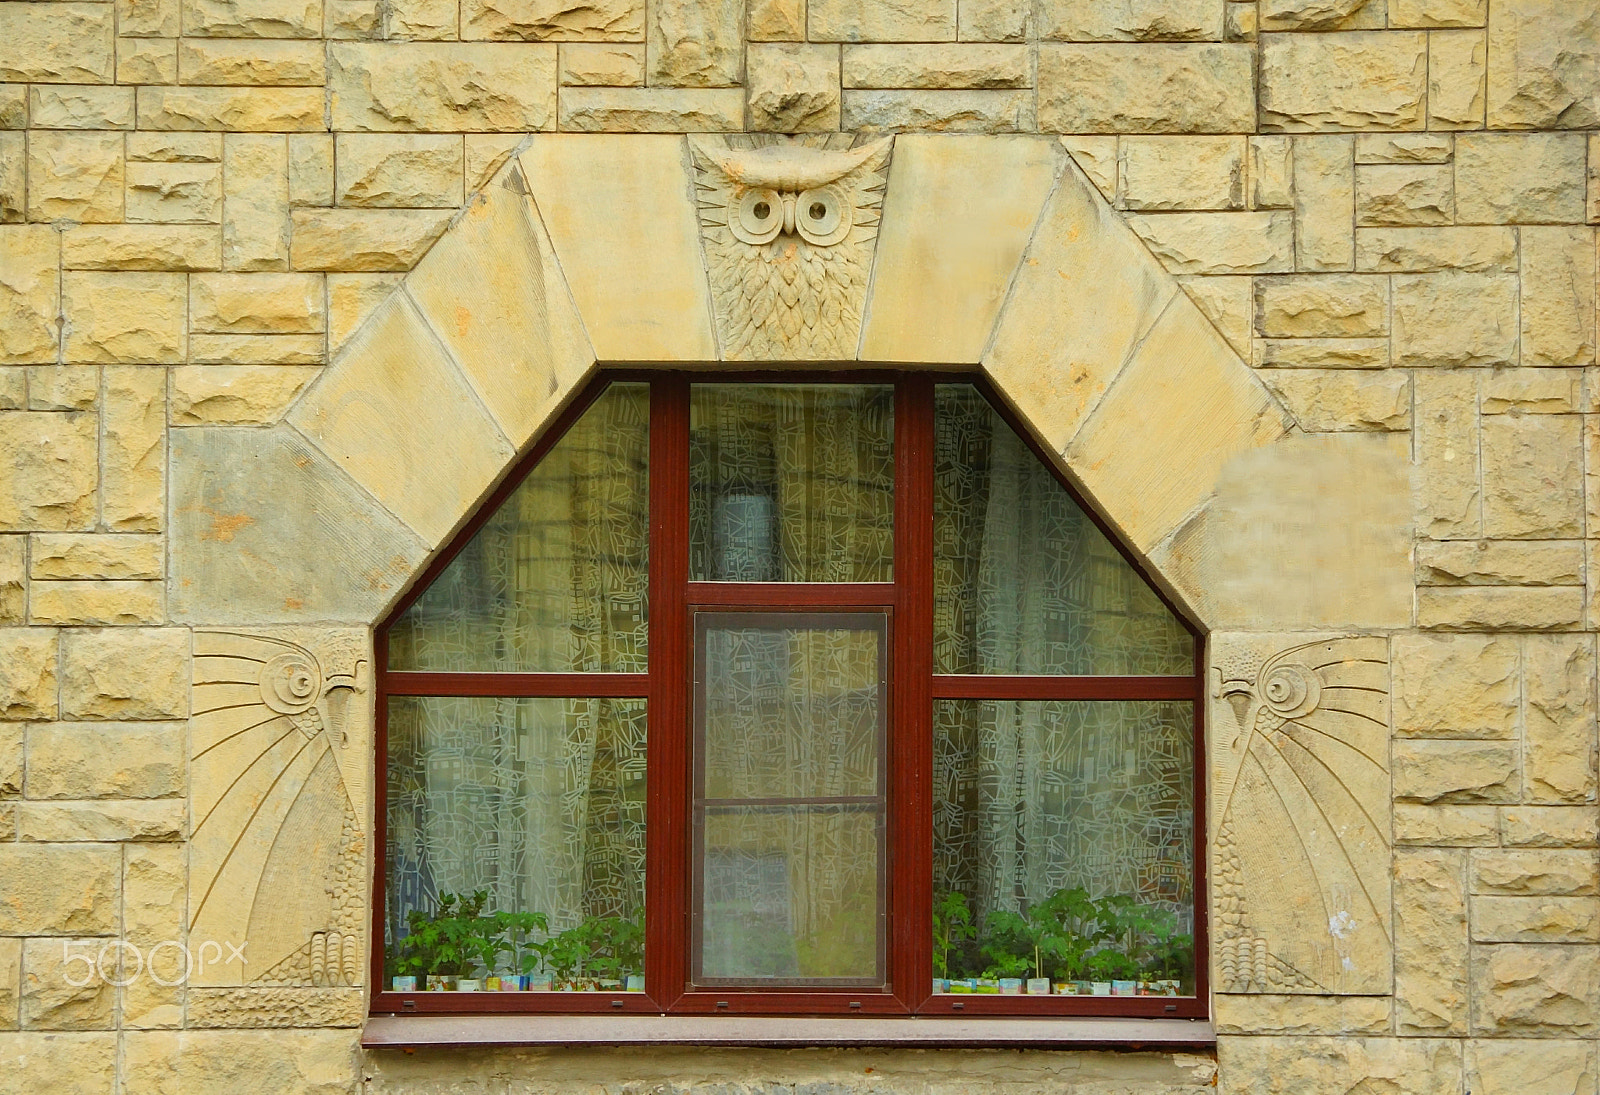 Tamron AF 28-105mm F4-5.6 [IF] sample photo. Fragment of the facade of a house with a window and an owl in the art nouveau style photography